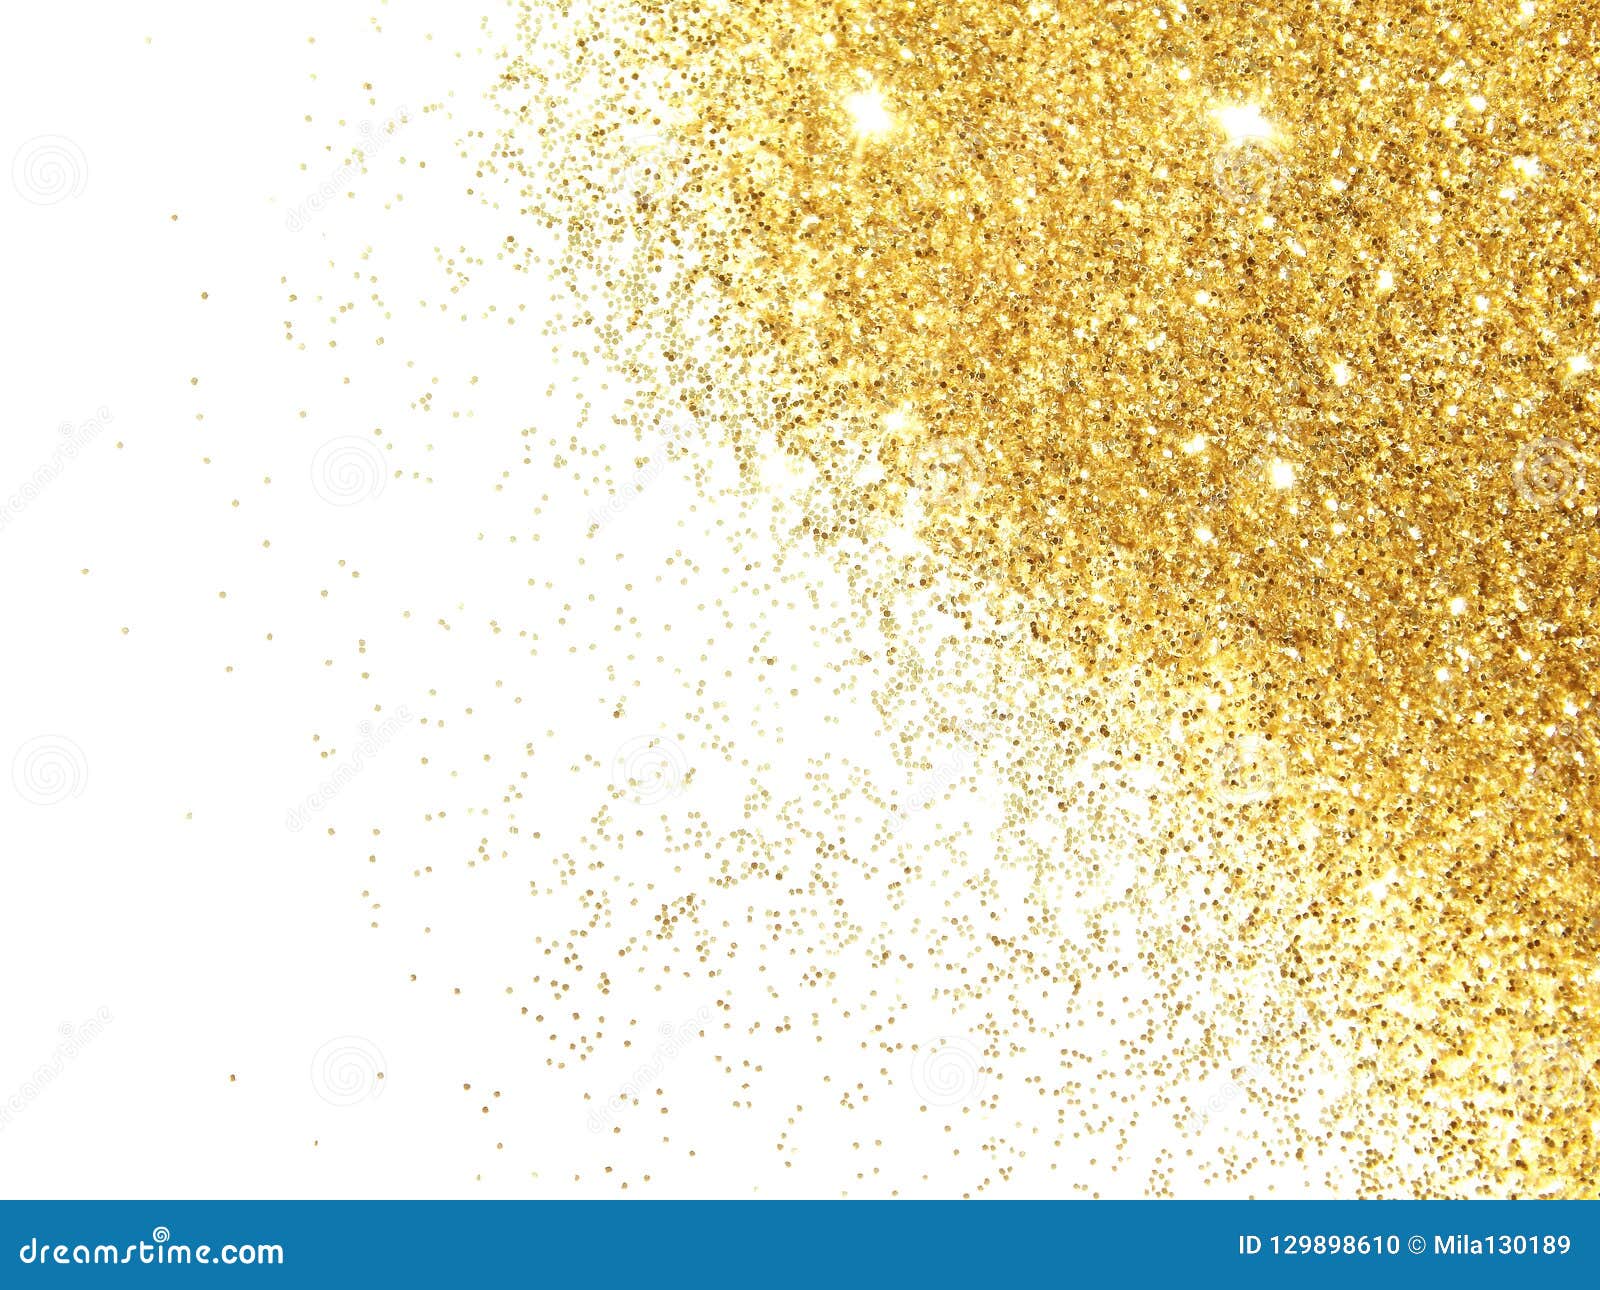 Gold Glitter Sparkles on White Background. Beautiful Abstract Backdrop  Stock Photo - Image of background, gleam: 129898610